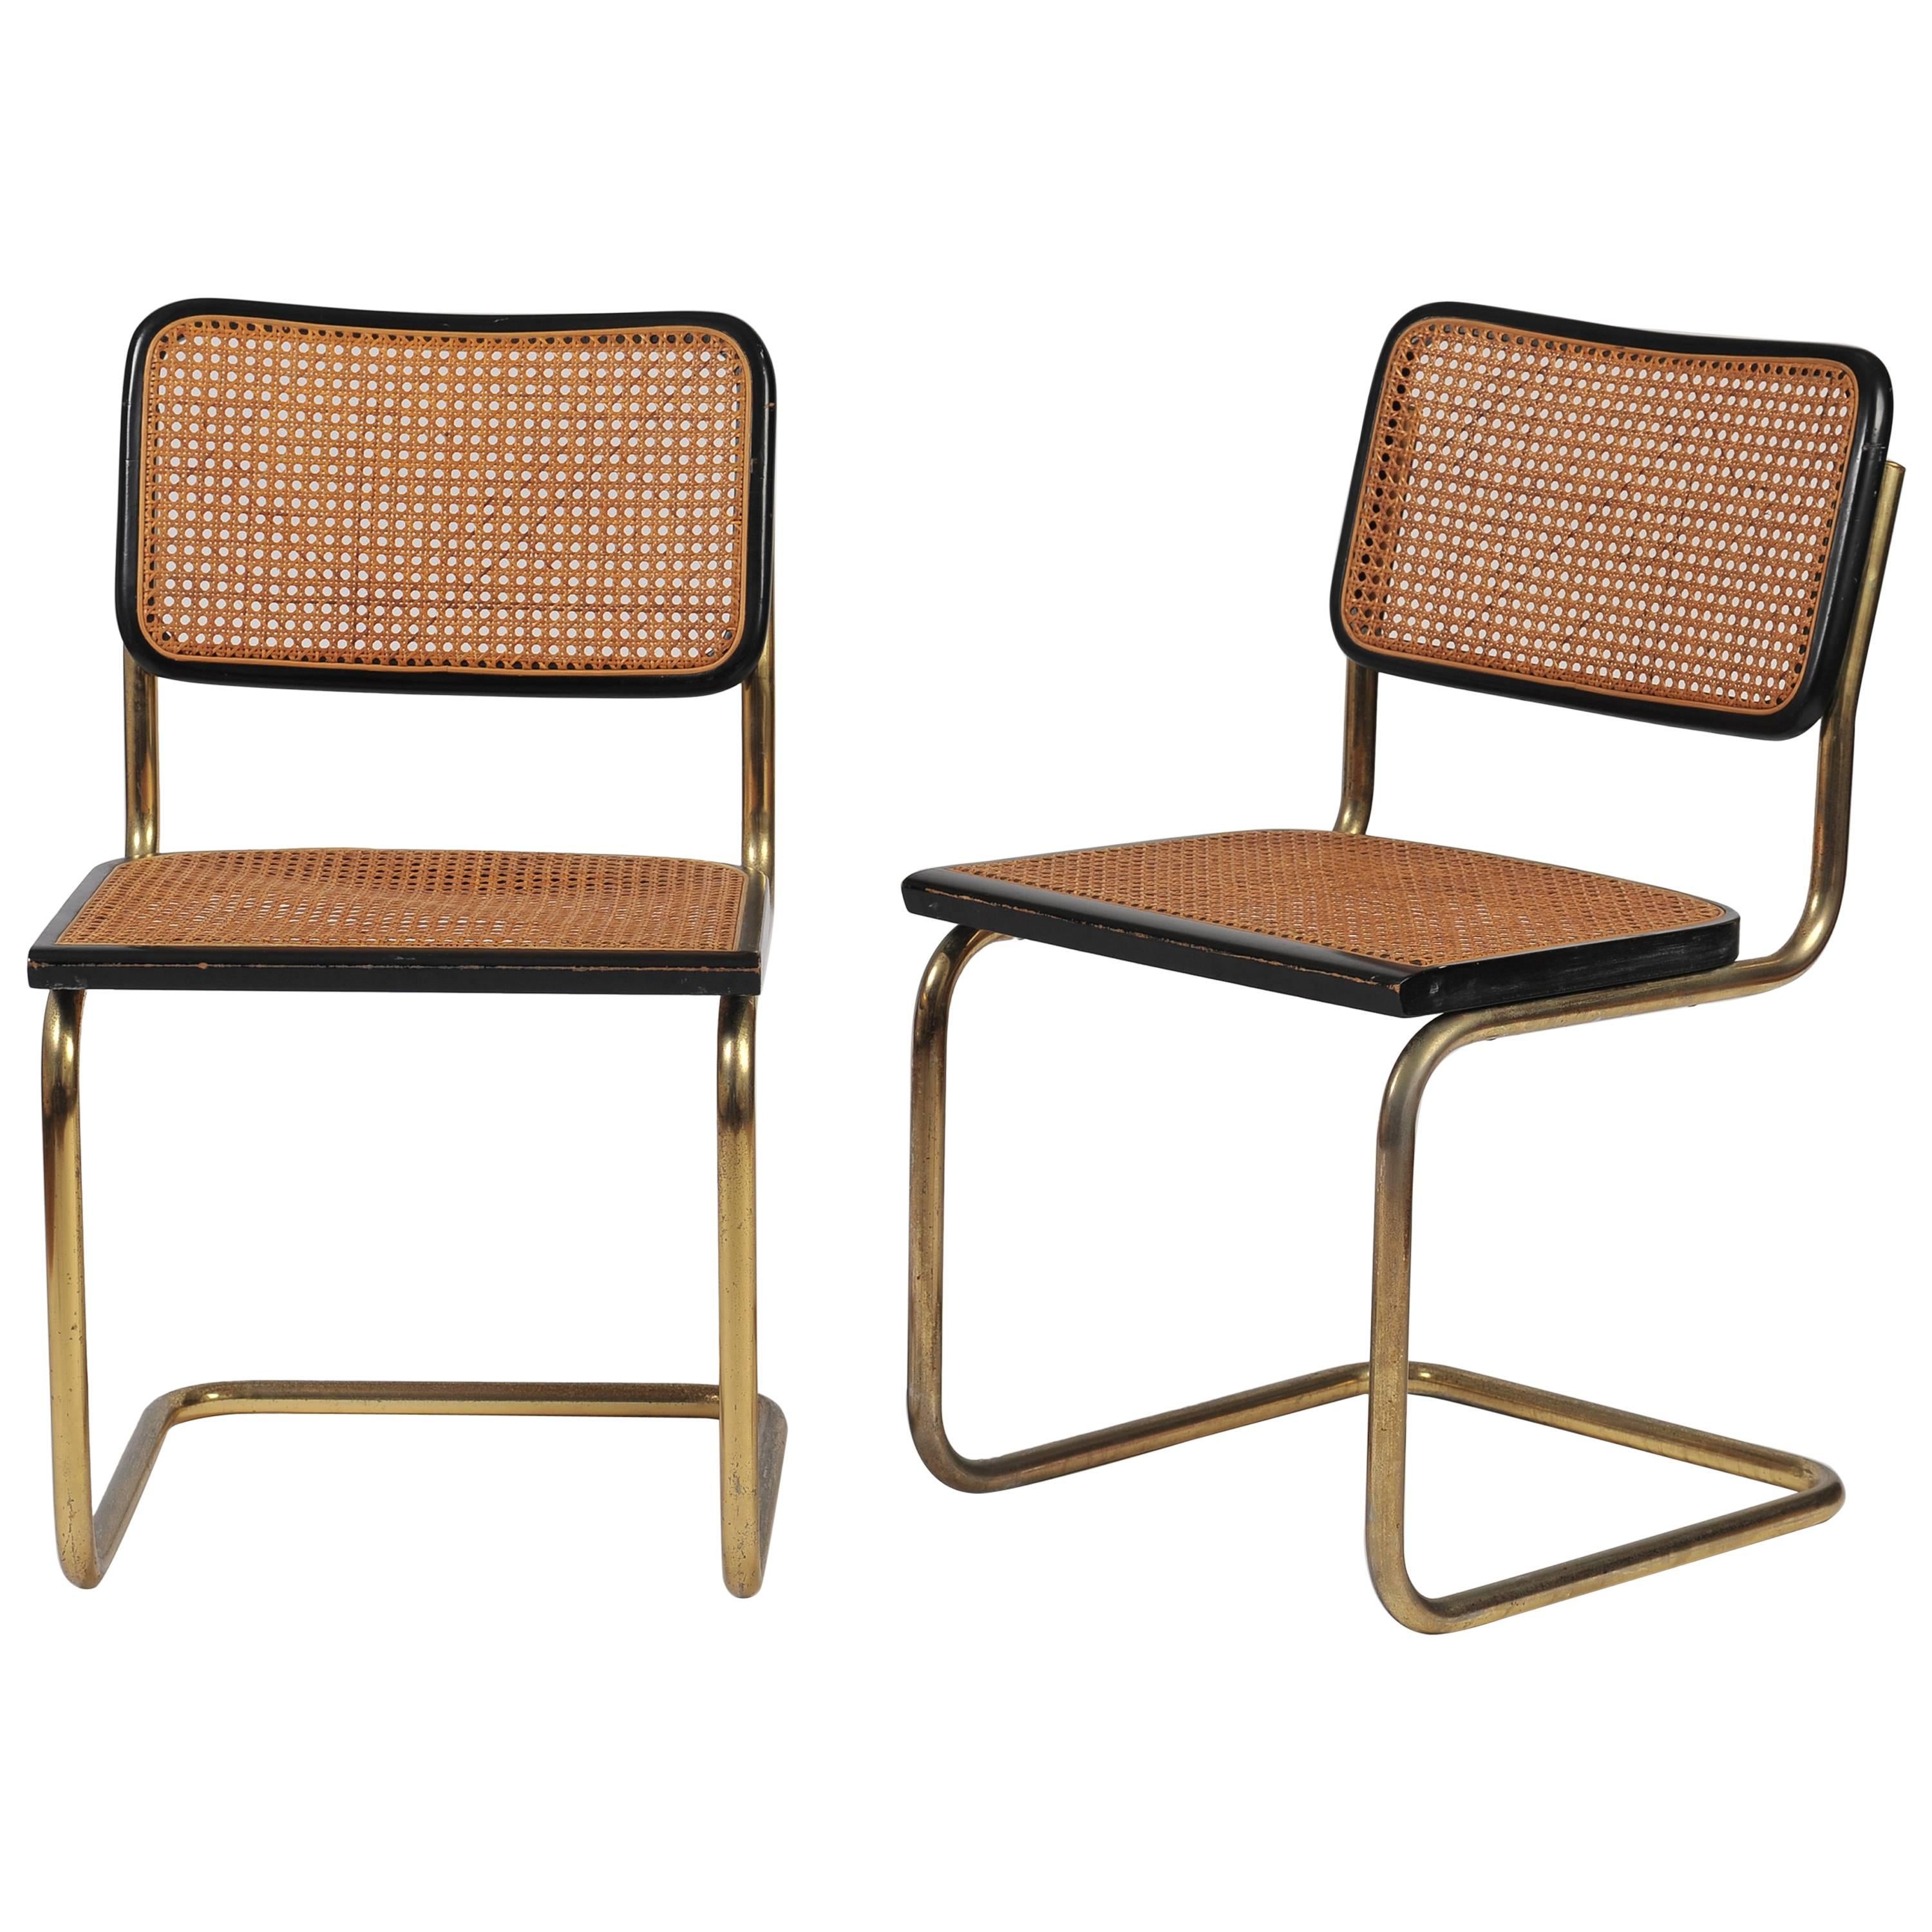 Pair of Gold and Cane Cesca Chairs by Marcel Breuer, 1928